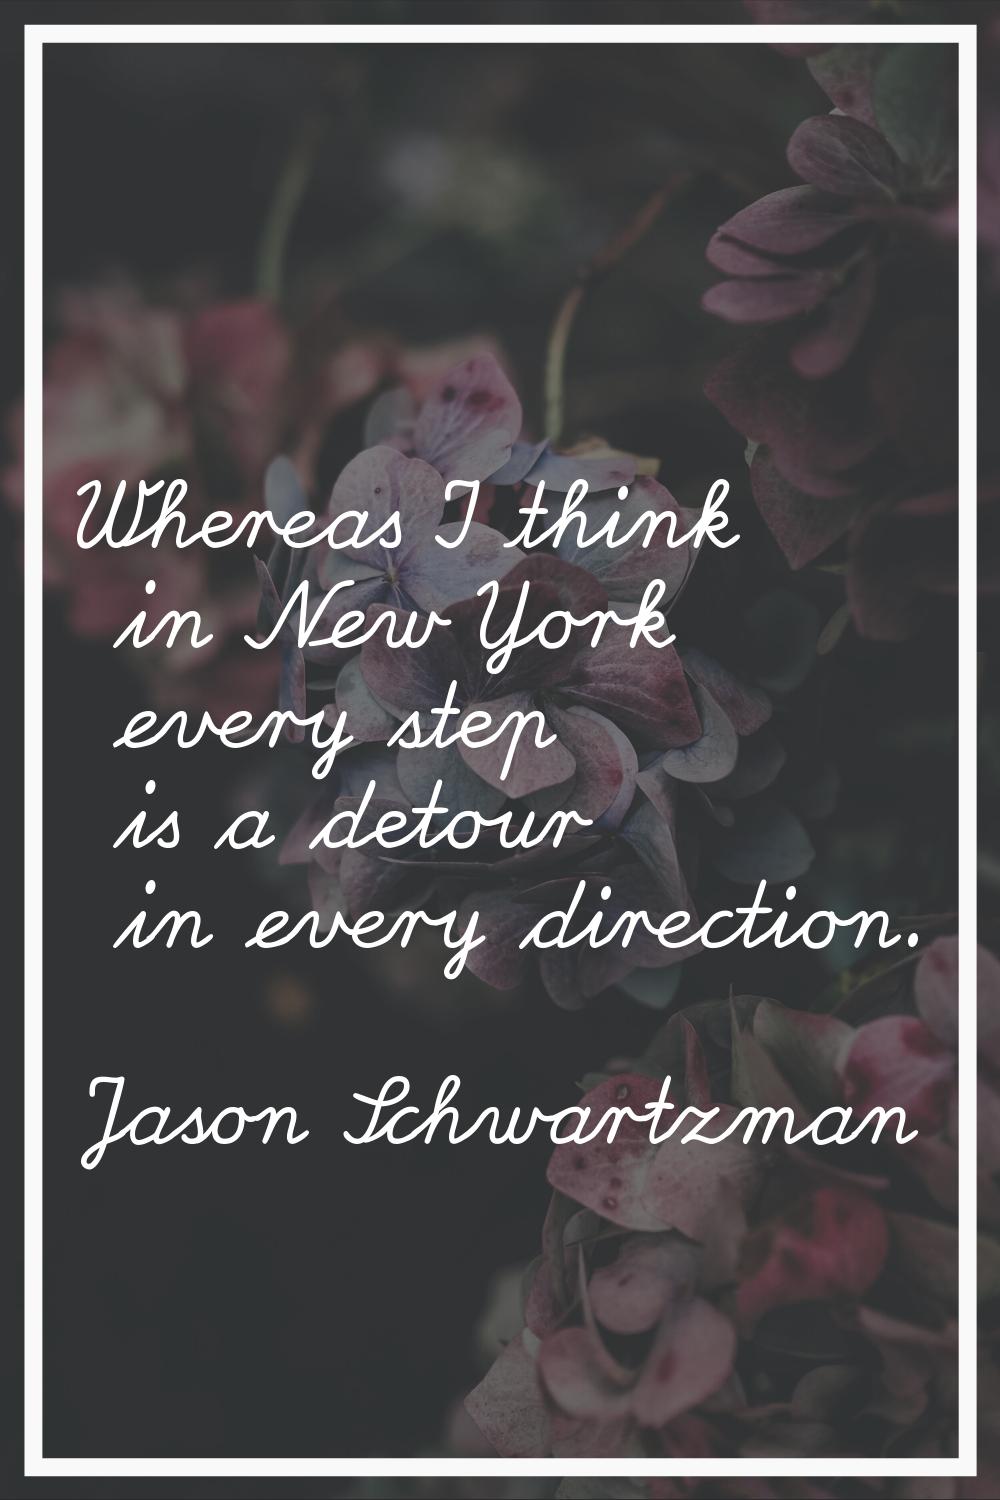 Whereas I think in New York every step is a detour in every direction.